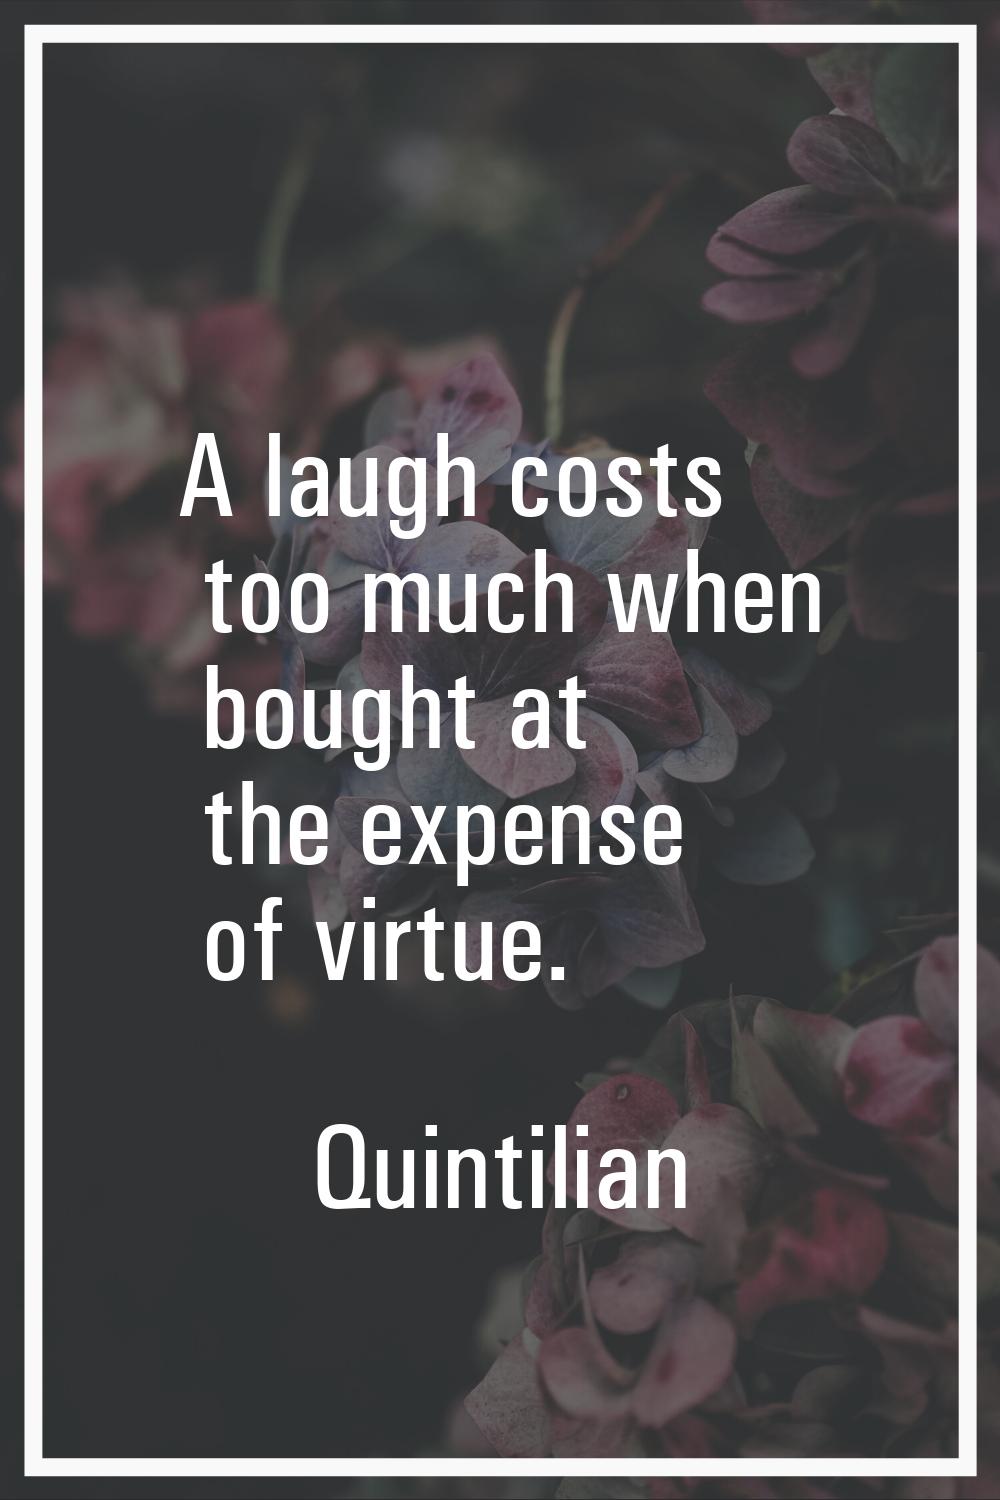 A laugh costs too much when bought at the expense of virtue.